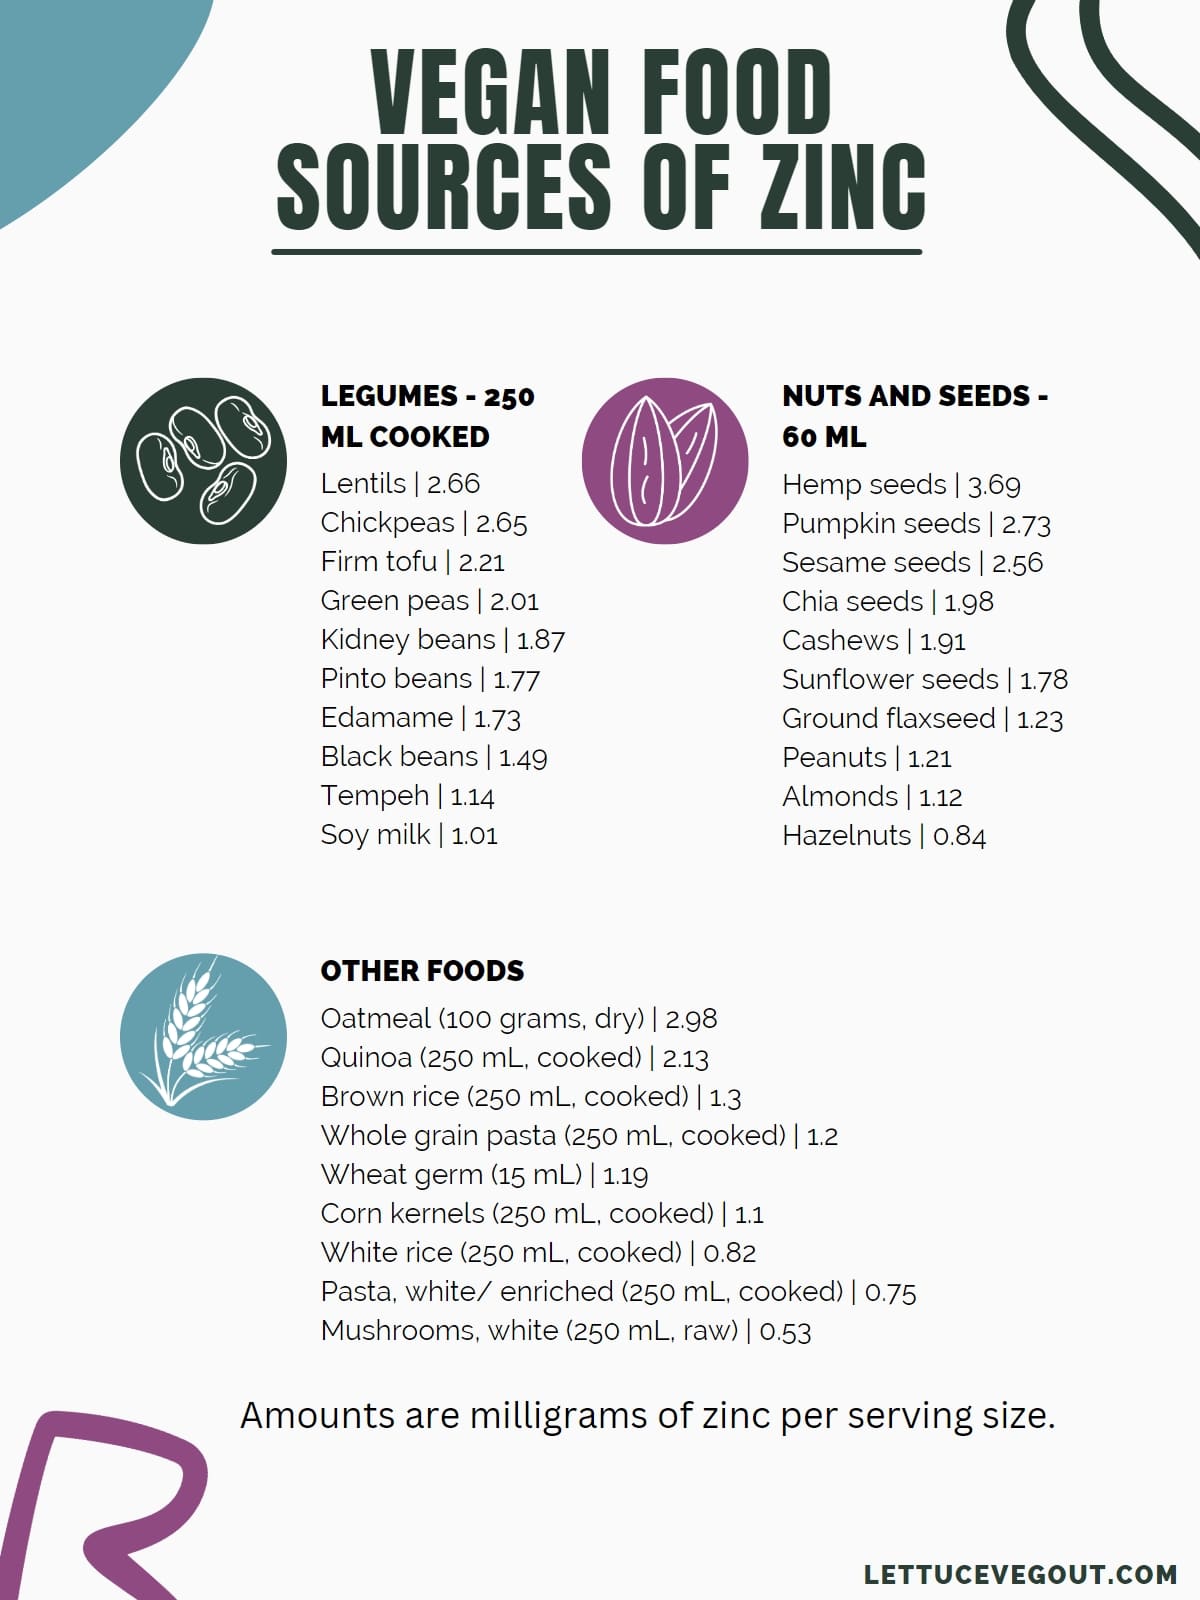 List of the zinc content in different vegan food groups (legumes, nuts and seeds, other).